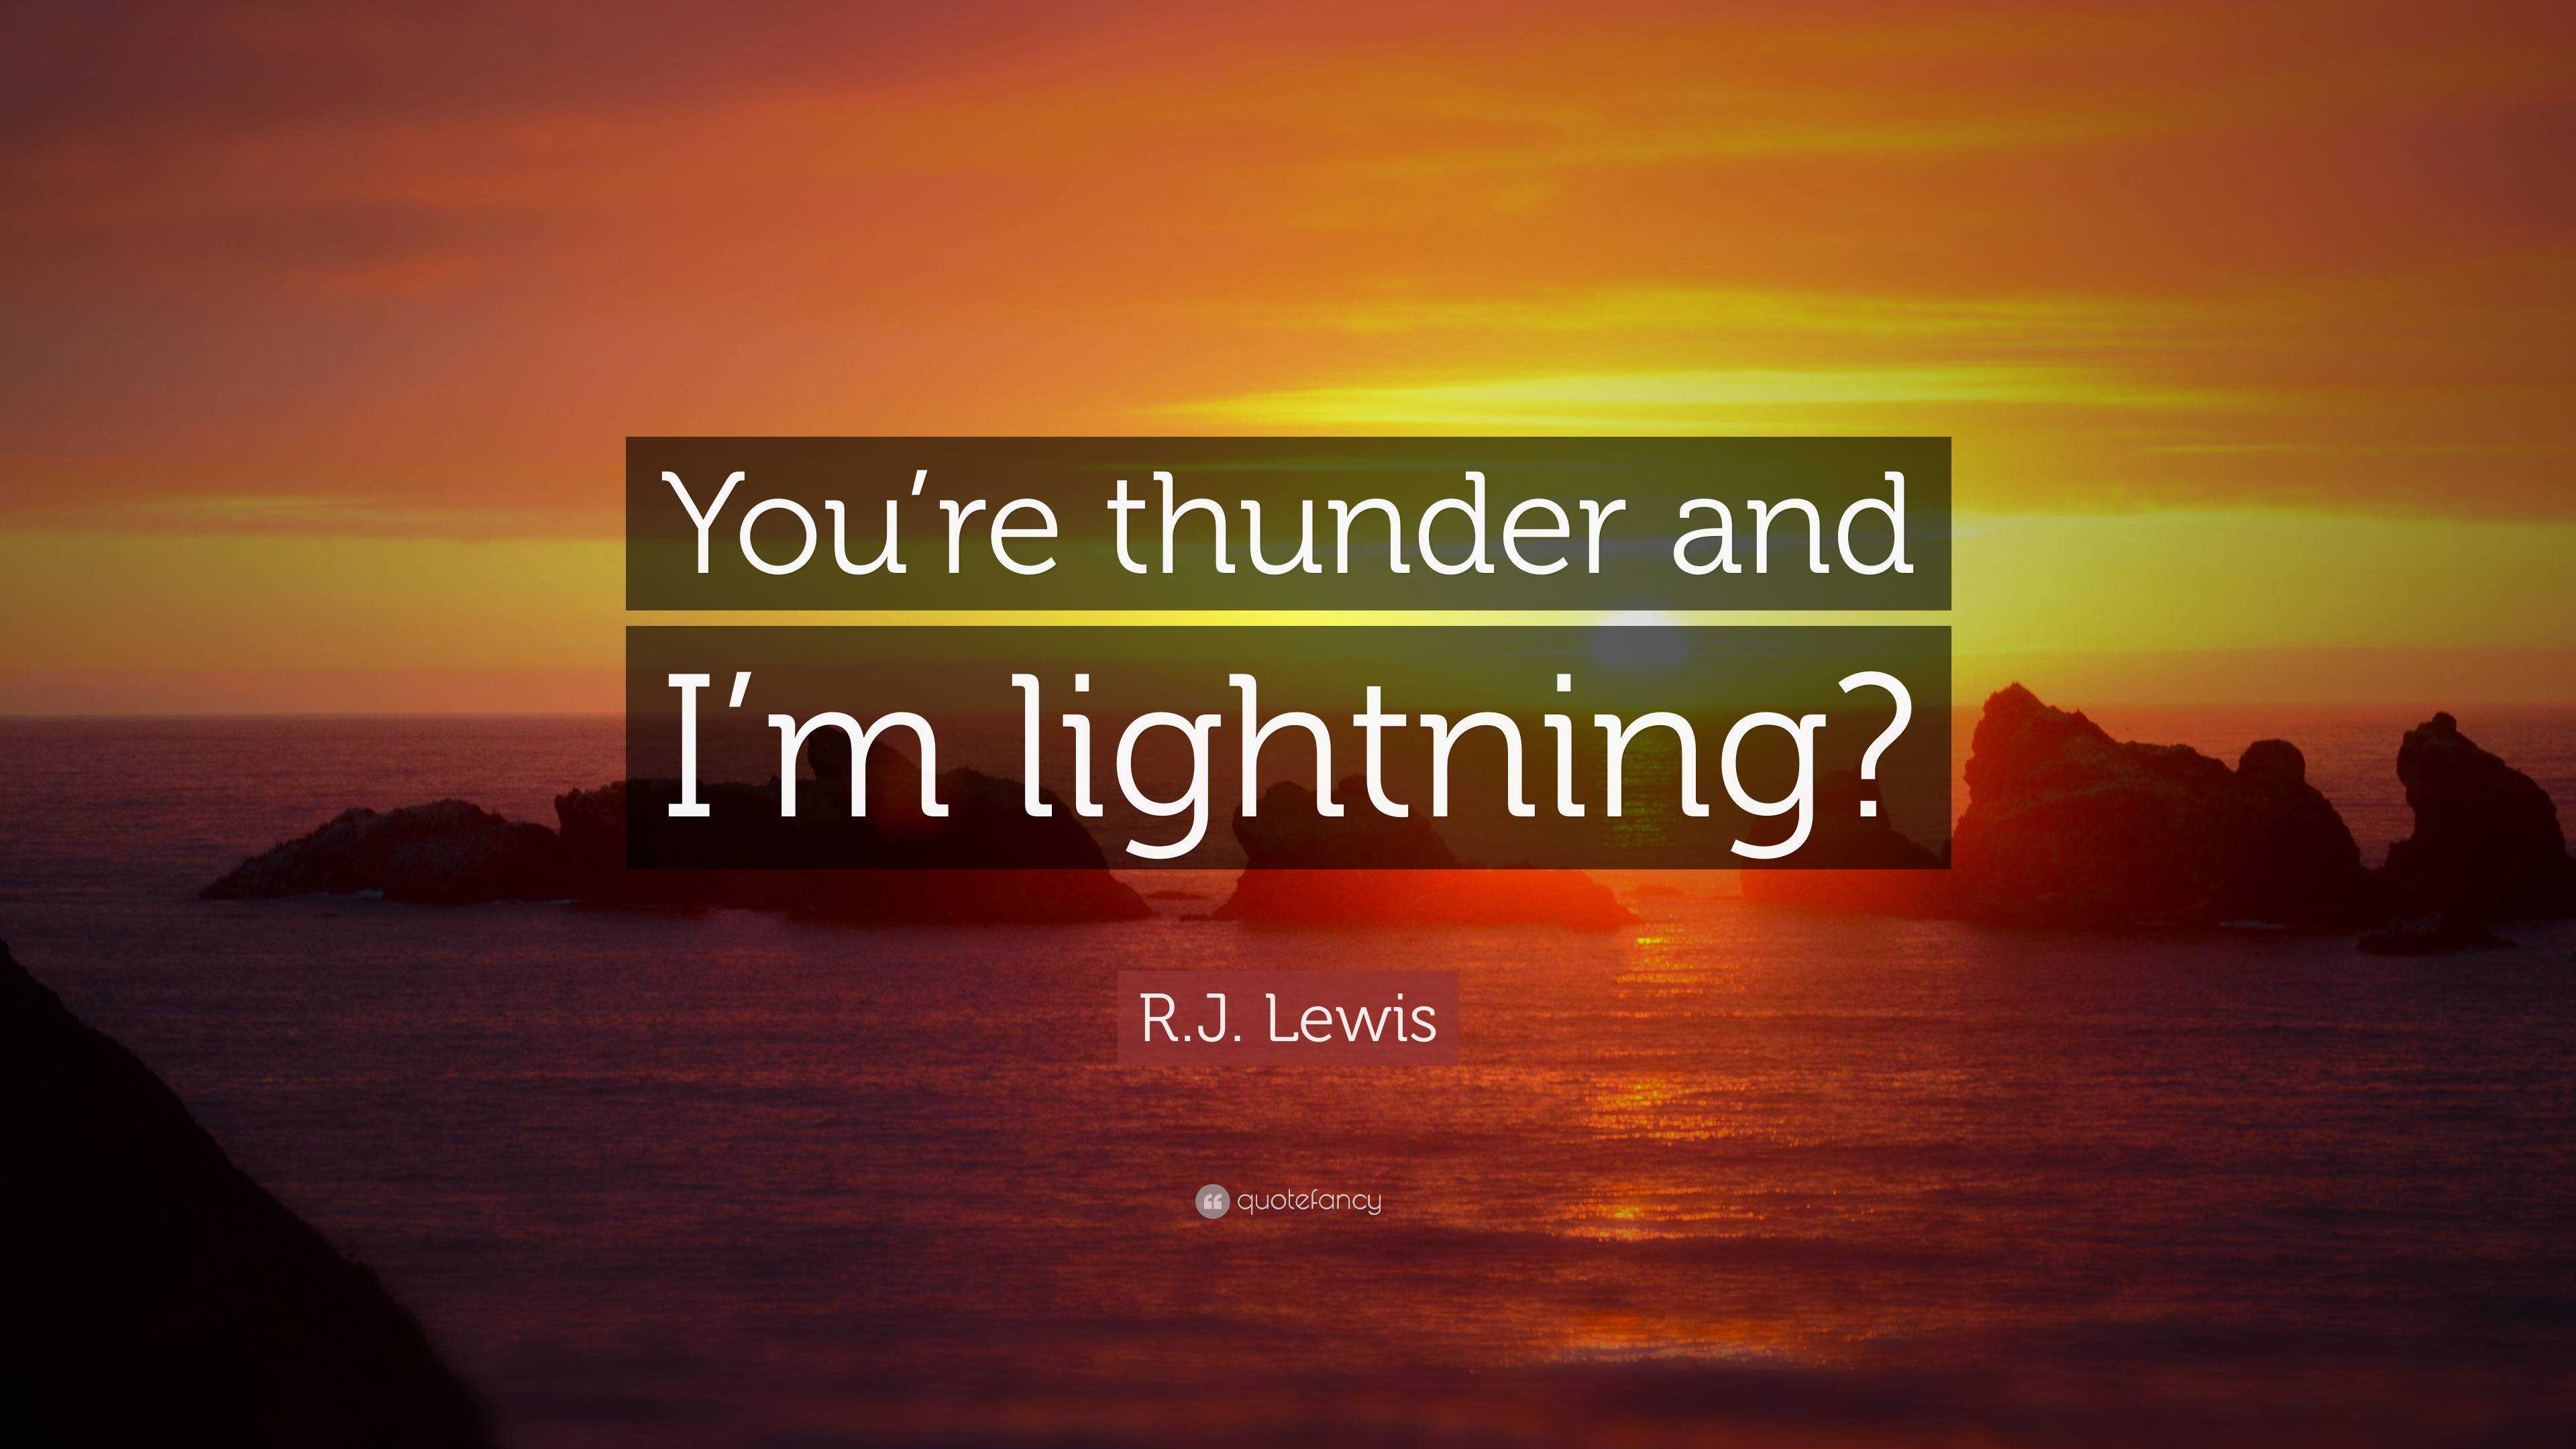 . Lewis Quote: “You're thunder and I'm lightning?”